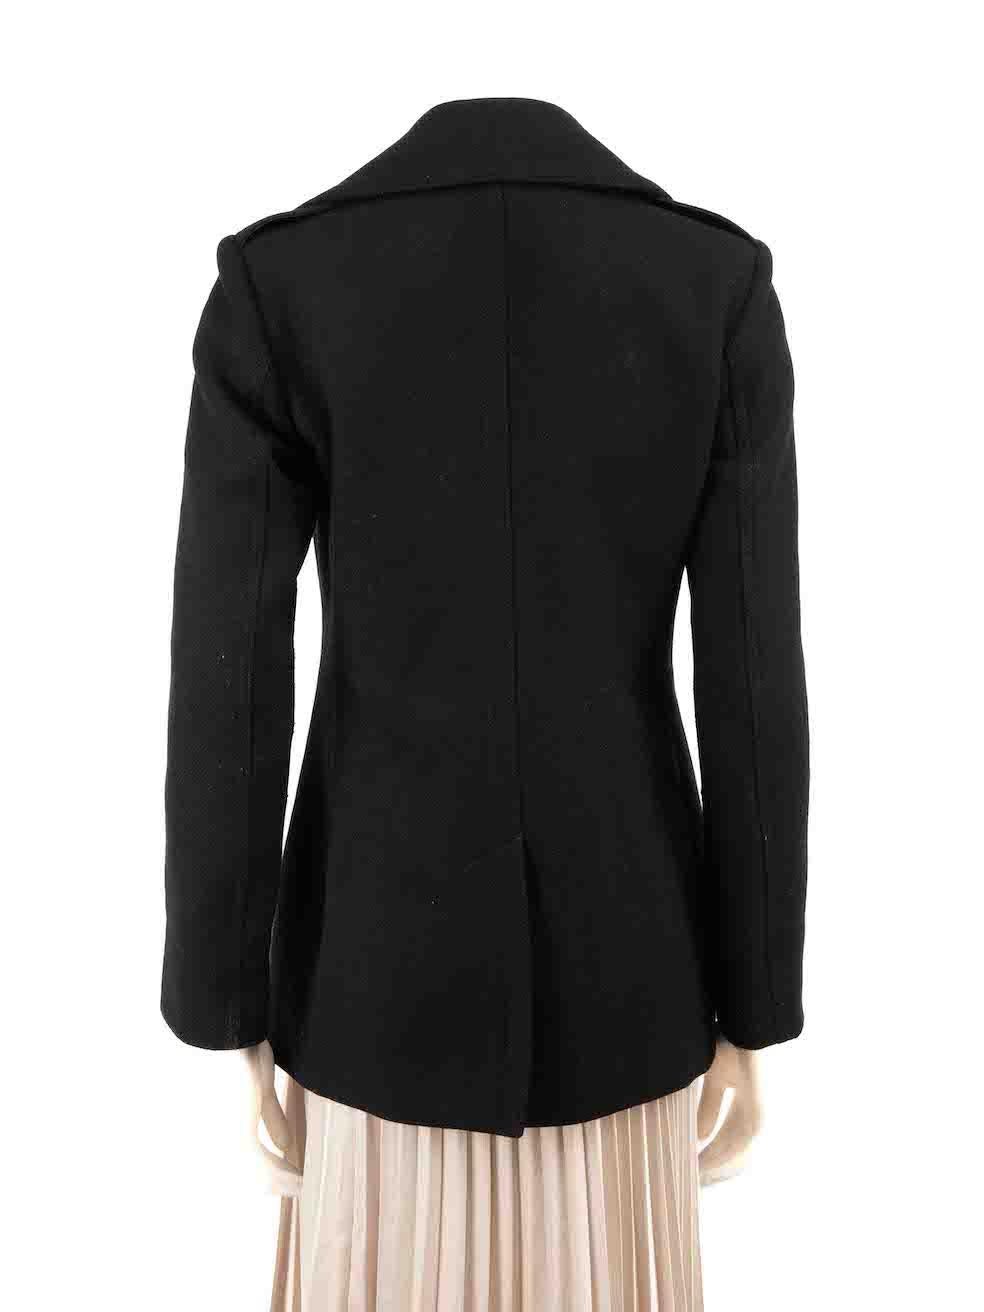 Burberry Burberry Brit Black Wool Double Breast Coat Size XS In Good Condition In London, GB